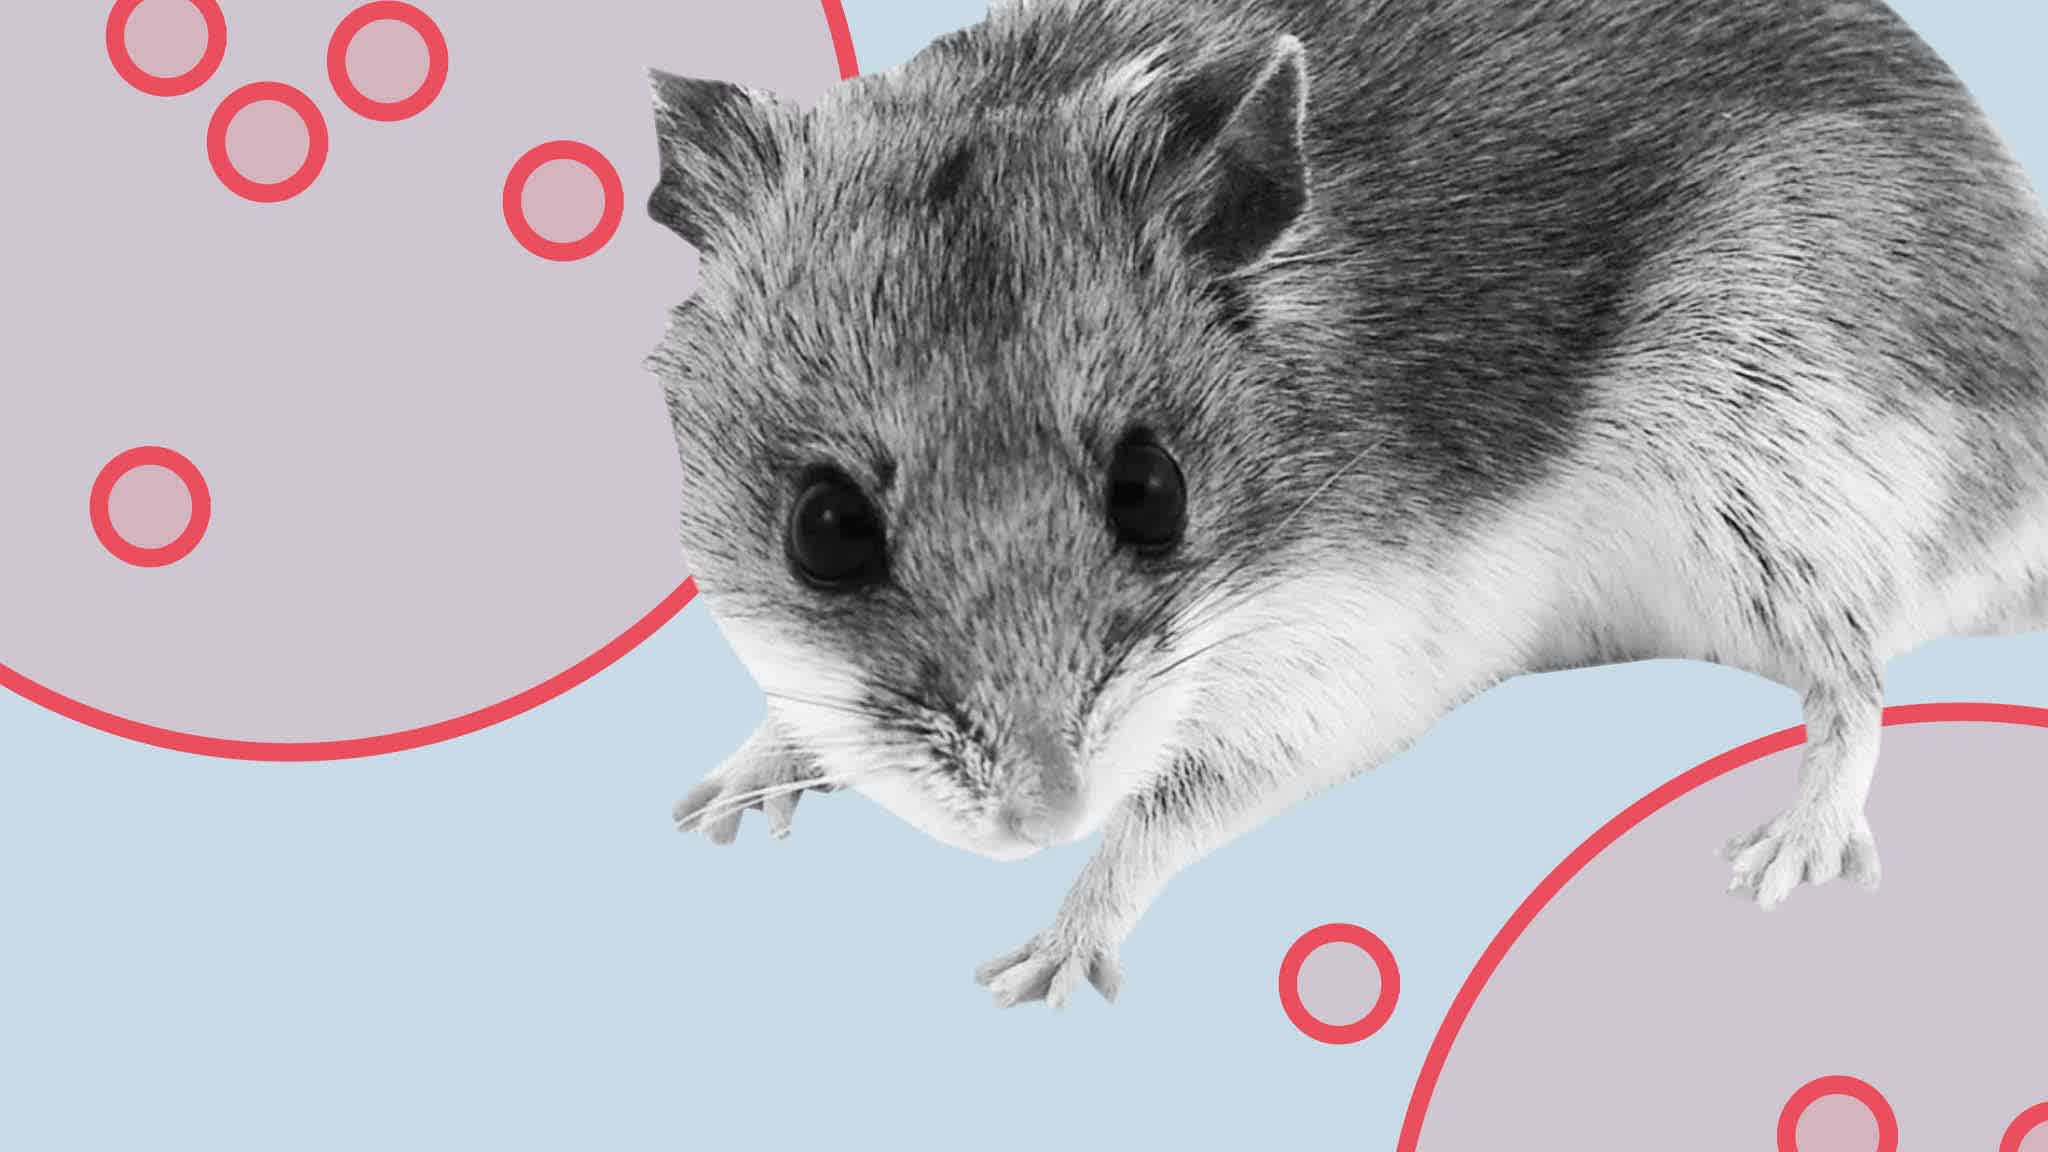 How widespread is Covid in animals and what are the risks to humans?